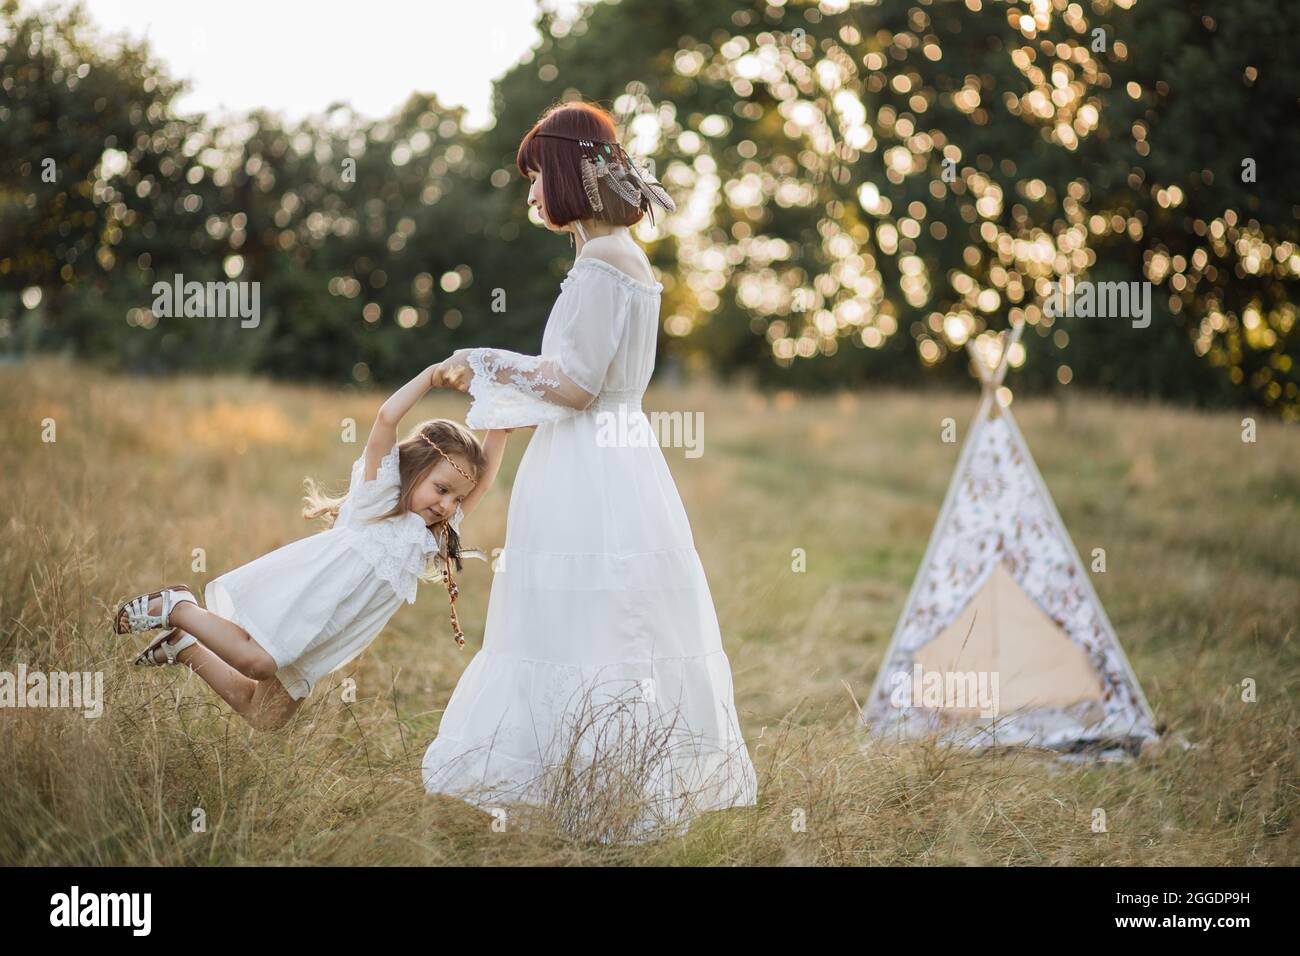 Family, mother's day, emotions concept. Mother and daughter dressed in  native american style, having fun in